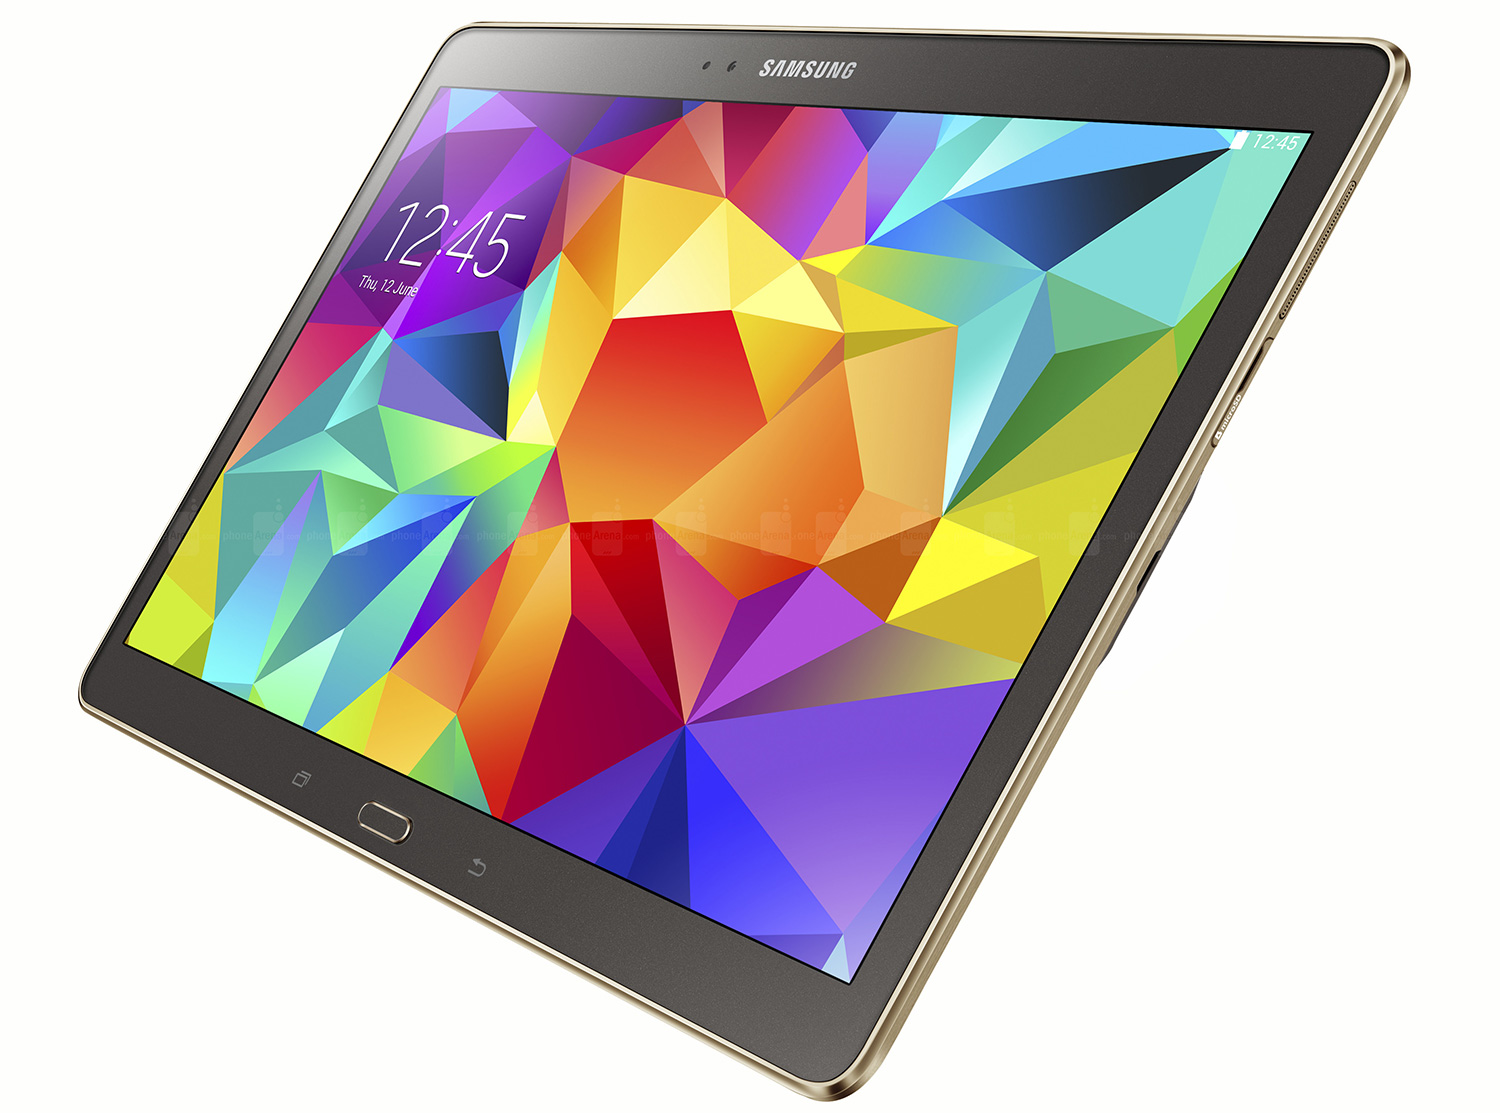 archief Enten aankleden Samsung Galaxy Tab S2 to be launched in June - NotebookCheck.net News